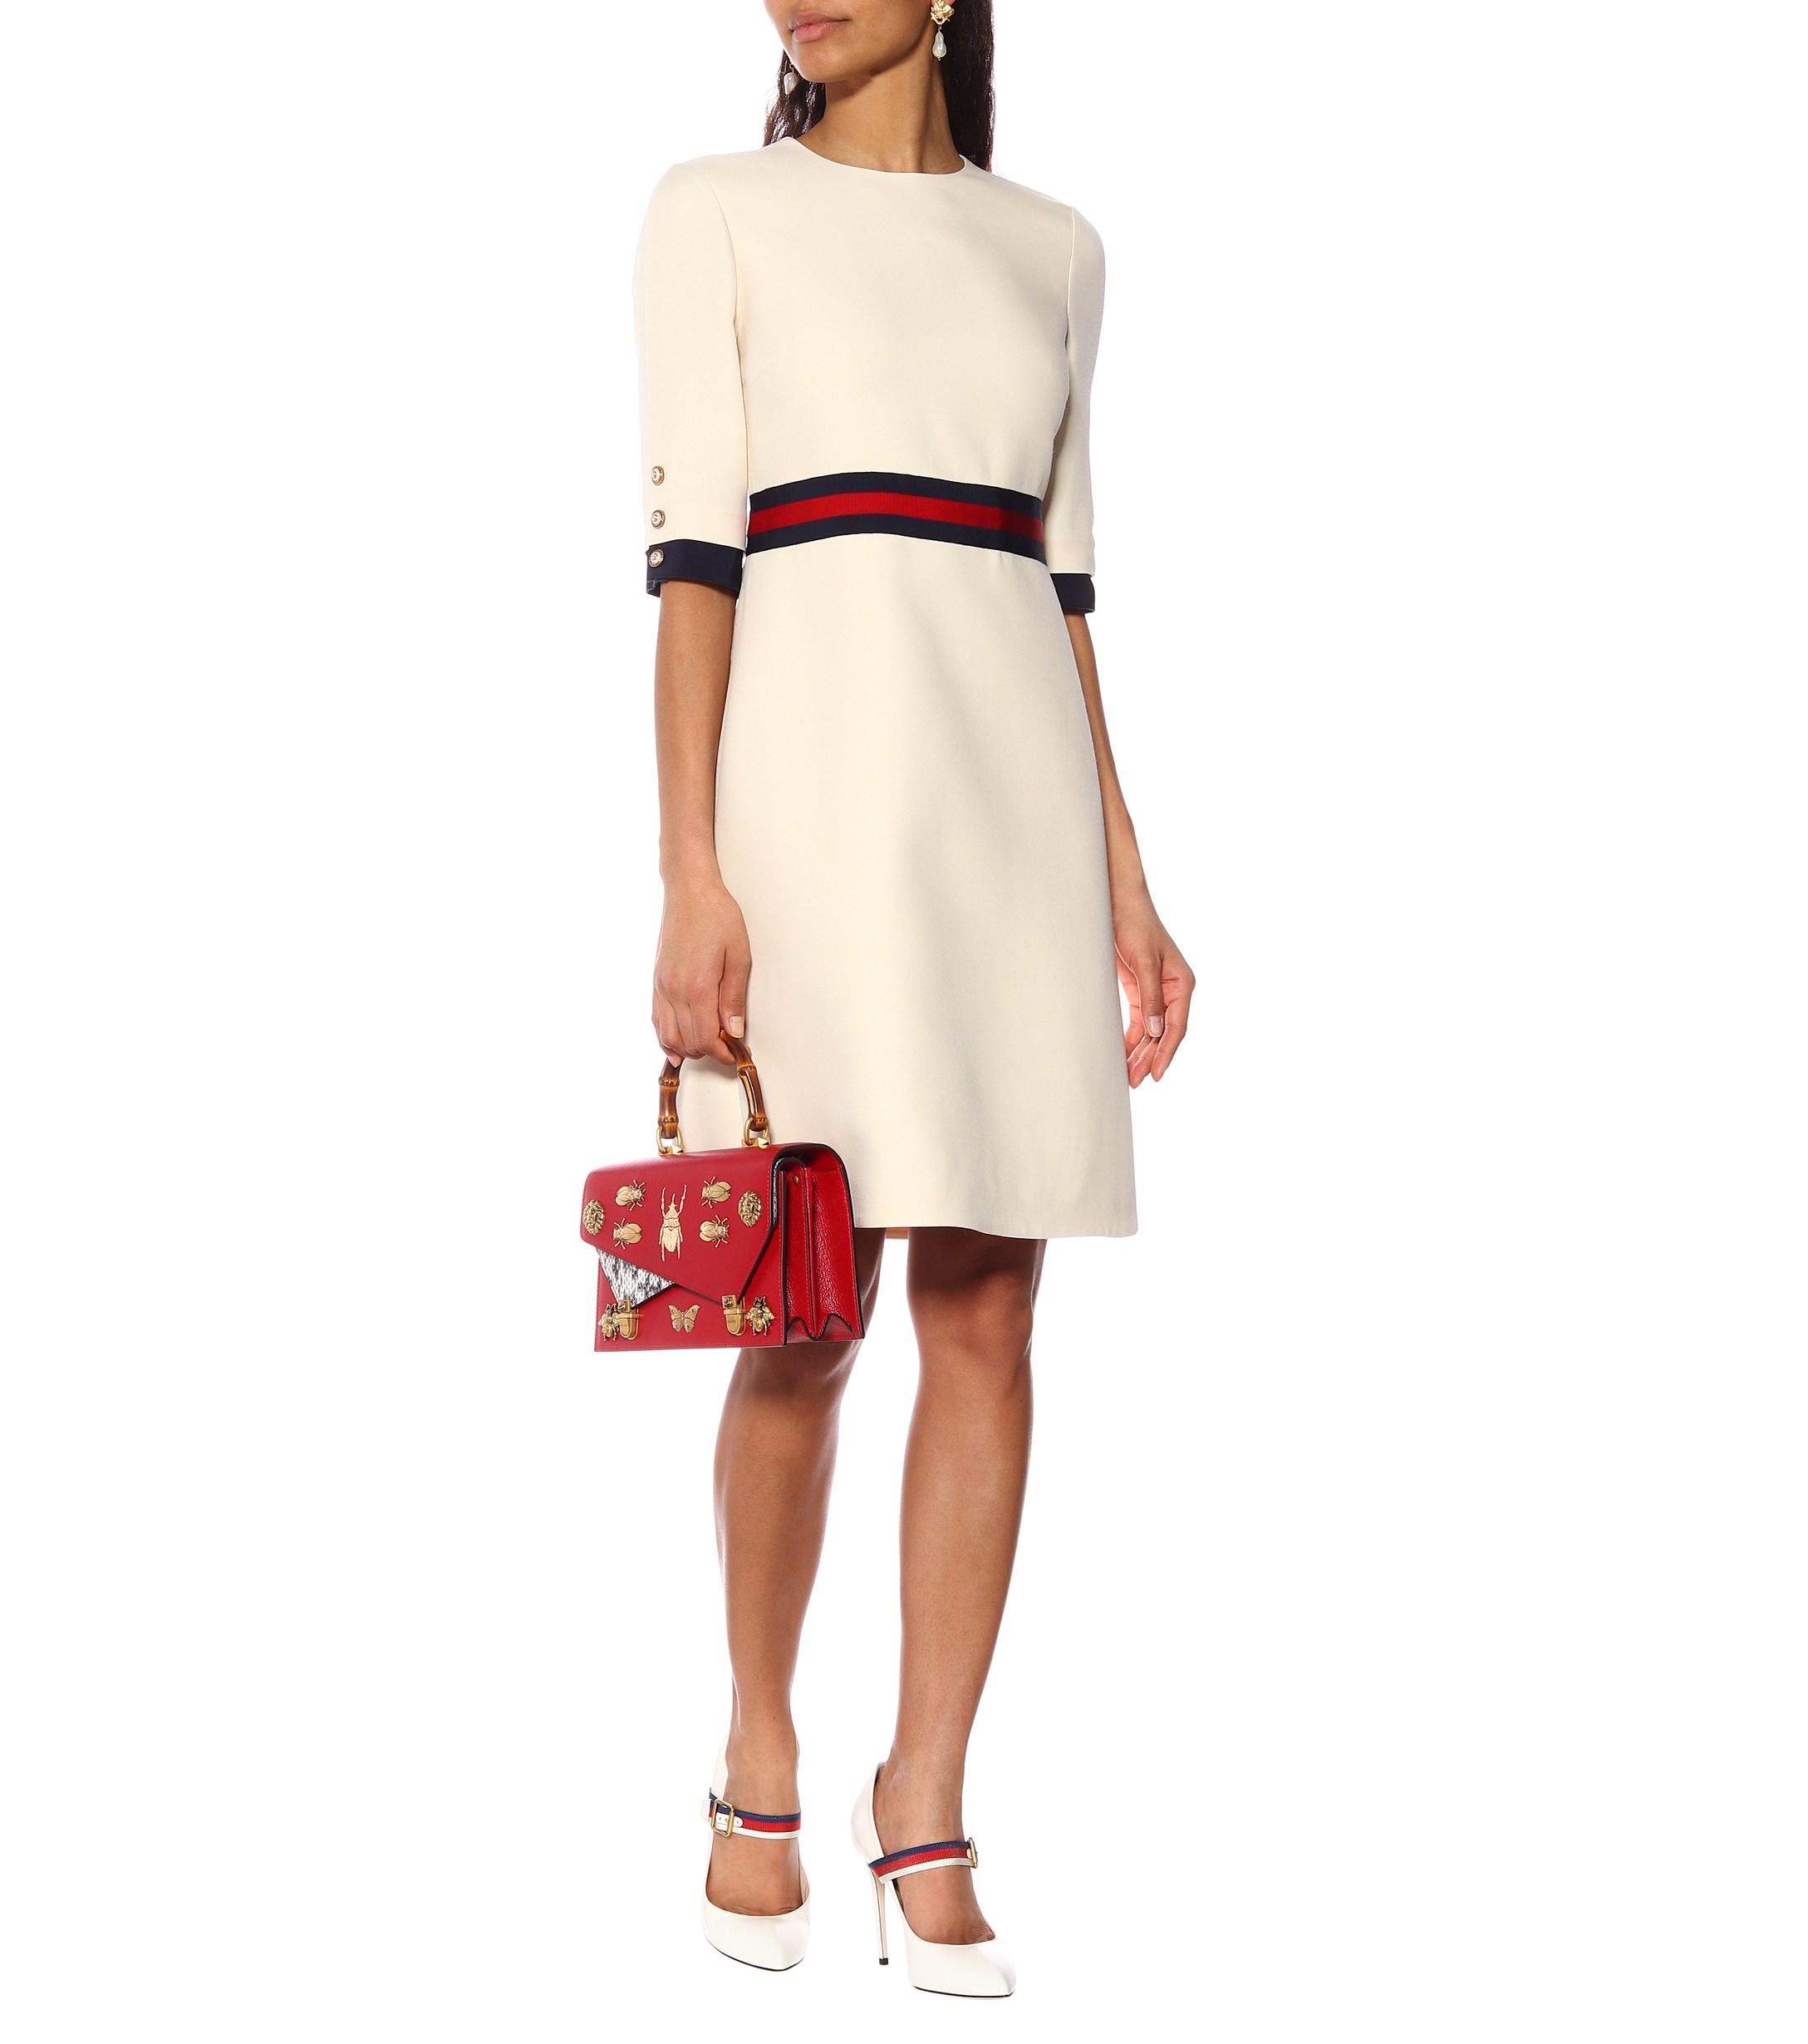 Gucci Wool And Silk Minidress in Ivory (White) | Lyst